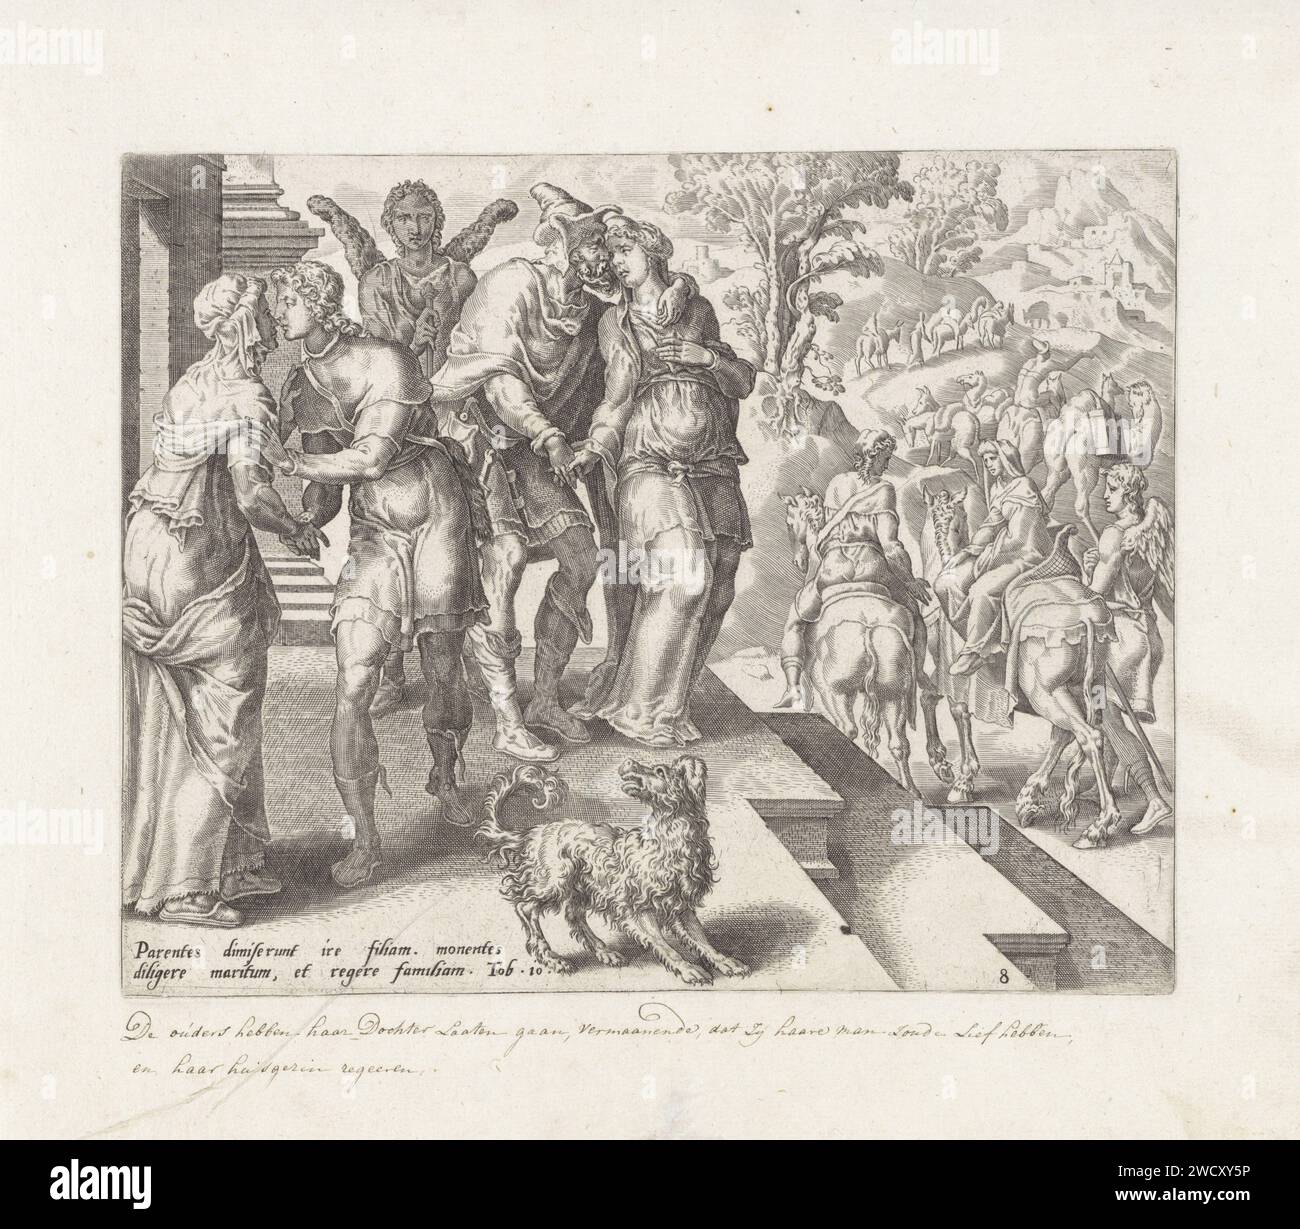 Departure of Tobias and Sara, Anonymous, After Maarten van Heemskerck, 1556 - 1633 print Sara says goodbye to Raguel and Tobias from Edna. The Archangel Rafaël watches. Tobias and Sara leave on horseback with camels and donkeys for them, which are packed with half of Raguels possessions as a gift for Tobias and his family. At the bottom of the margin a two -way caption in Latin from Tobit 10. print maker: Low Countriespublisher: Antwerppublisher: Antwerp paper engraving the leave-taking  Tobias' return Stock Photo